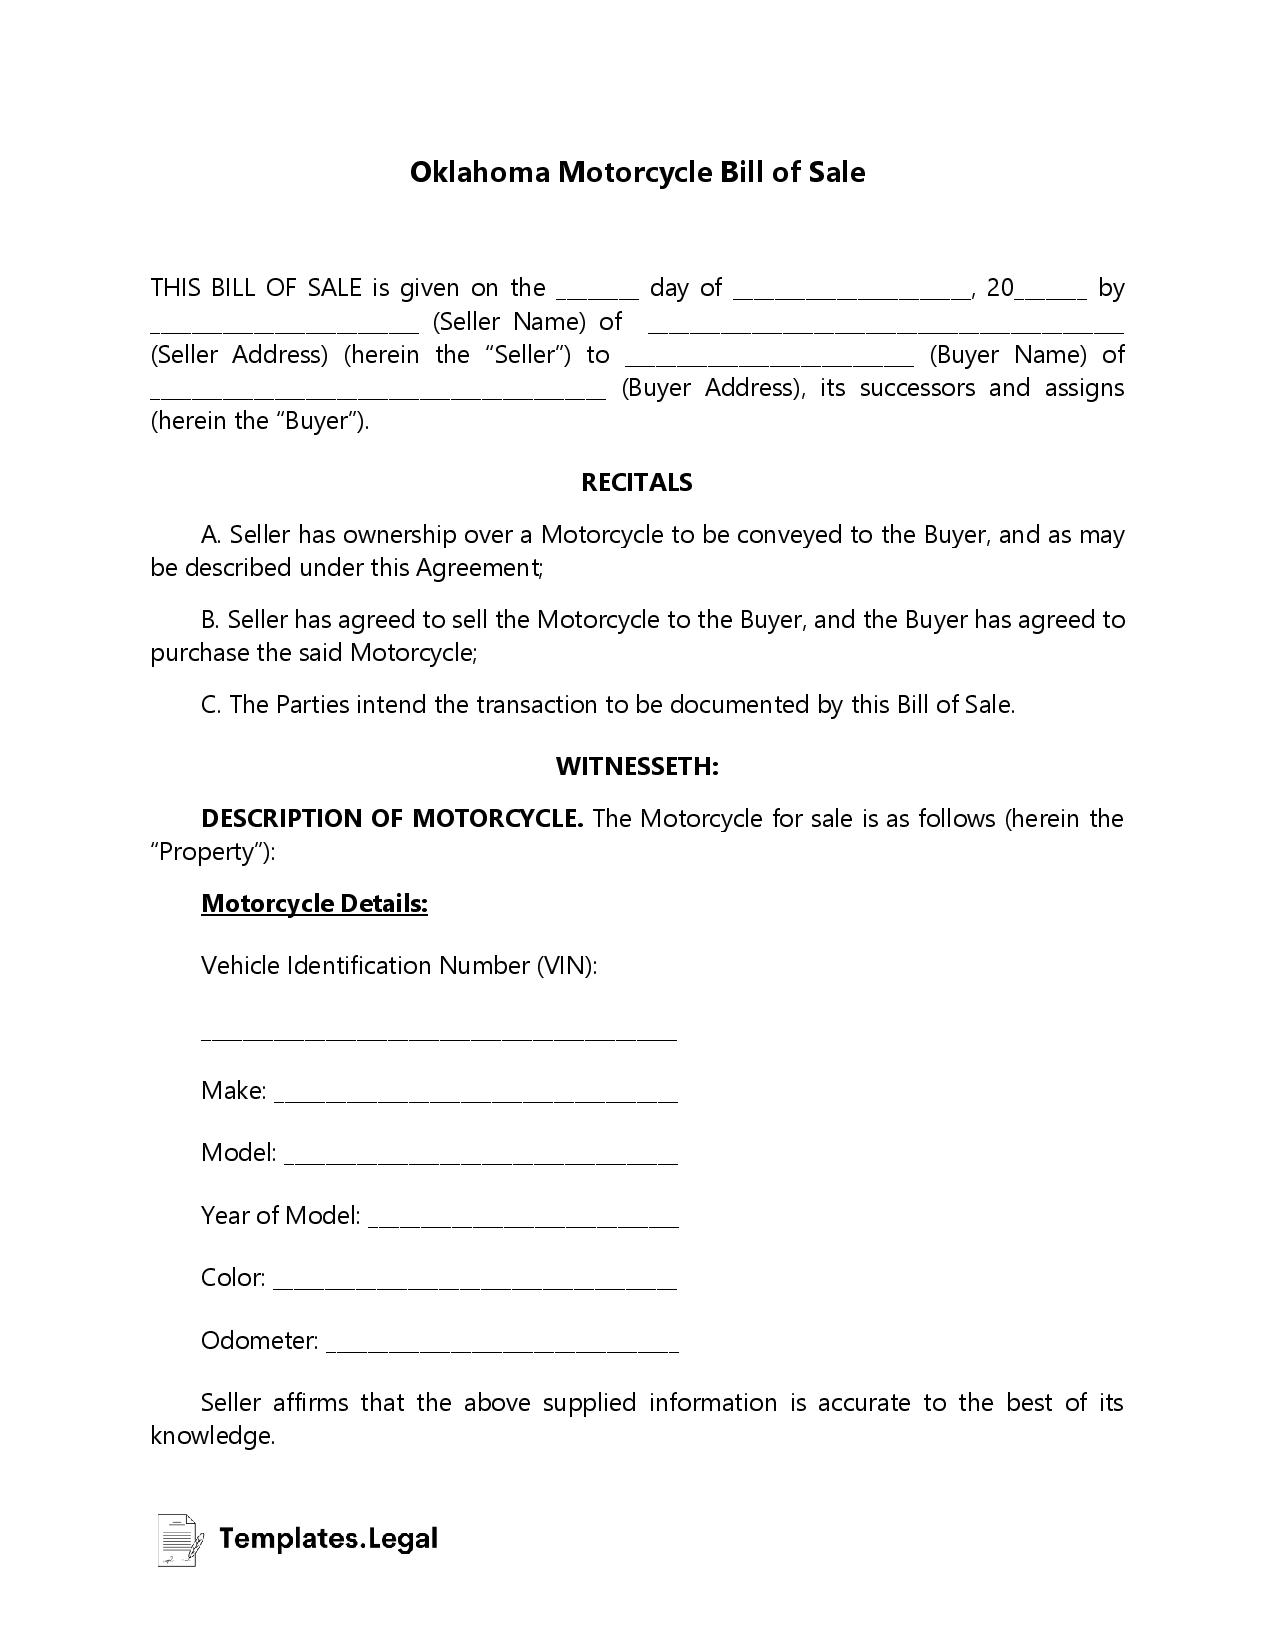 Oklahoma Motorcycle Bill of Sale - Templates.Legal